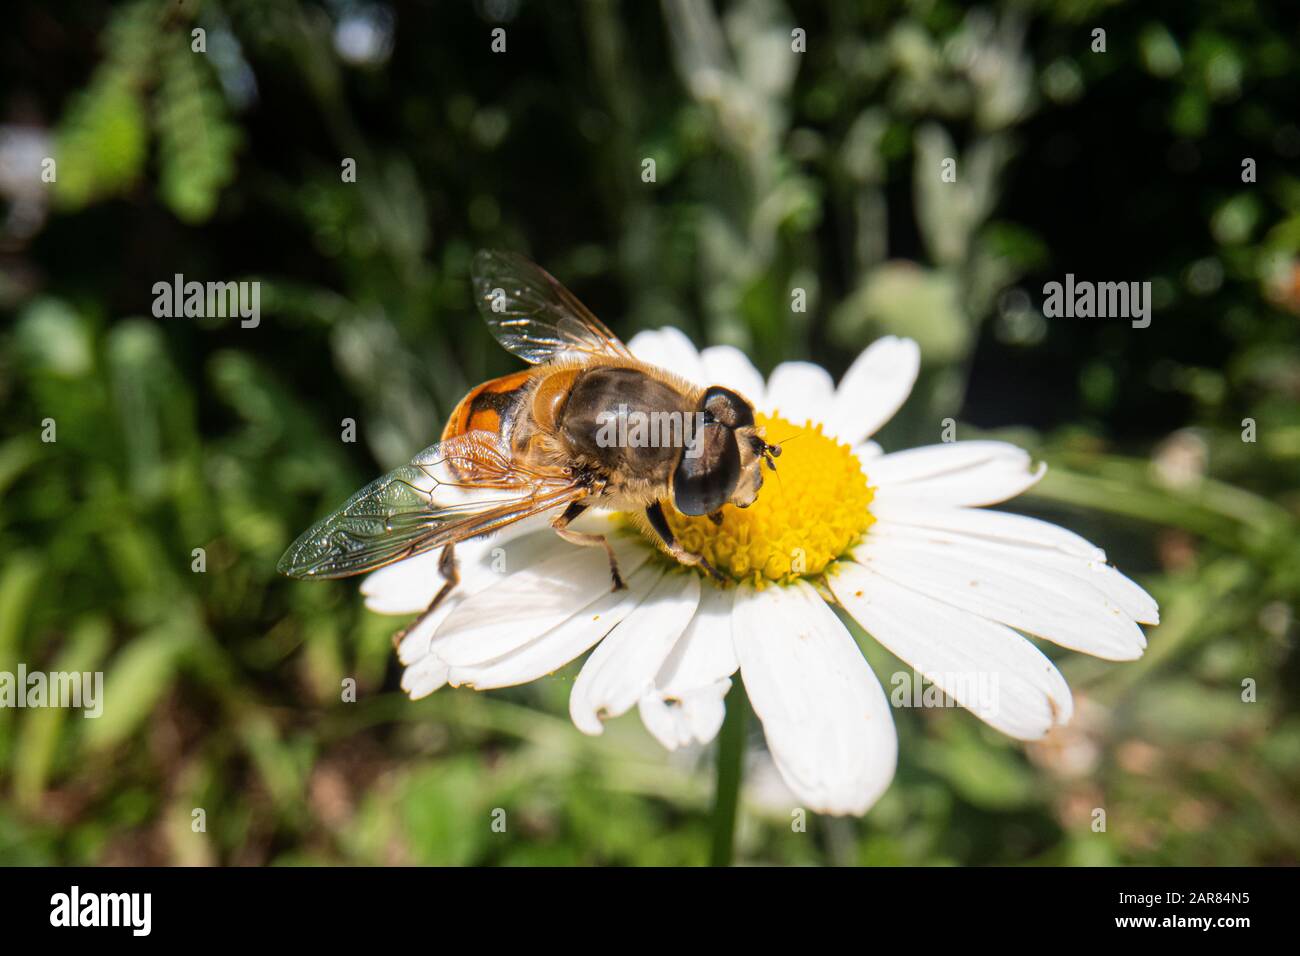 fly on a beautiful flower with nature background, super macro photography of an insect on flower Stock Photo